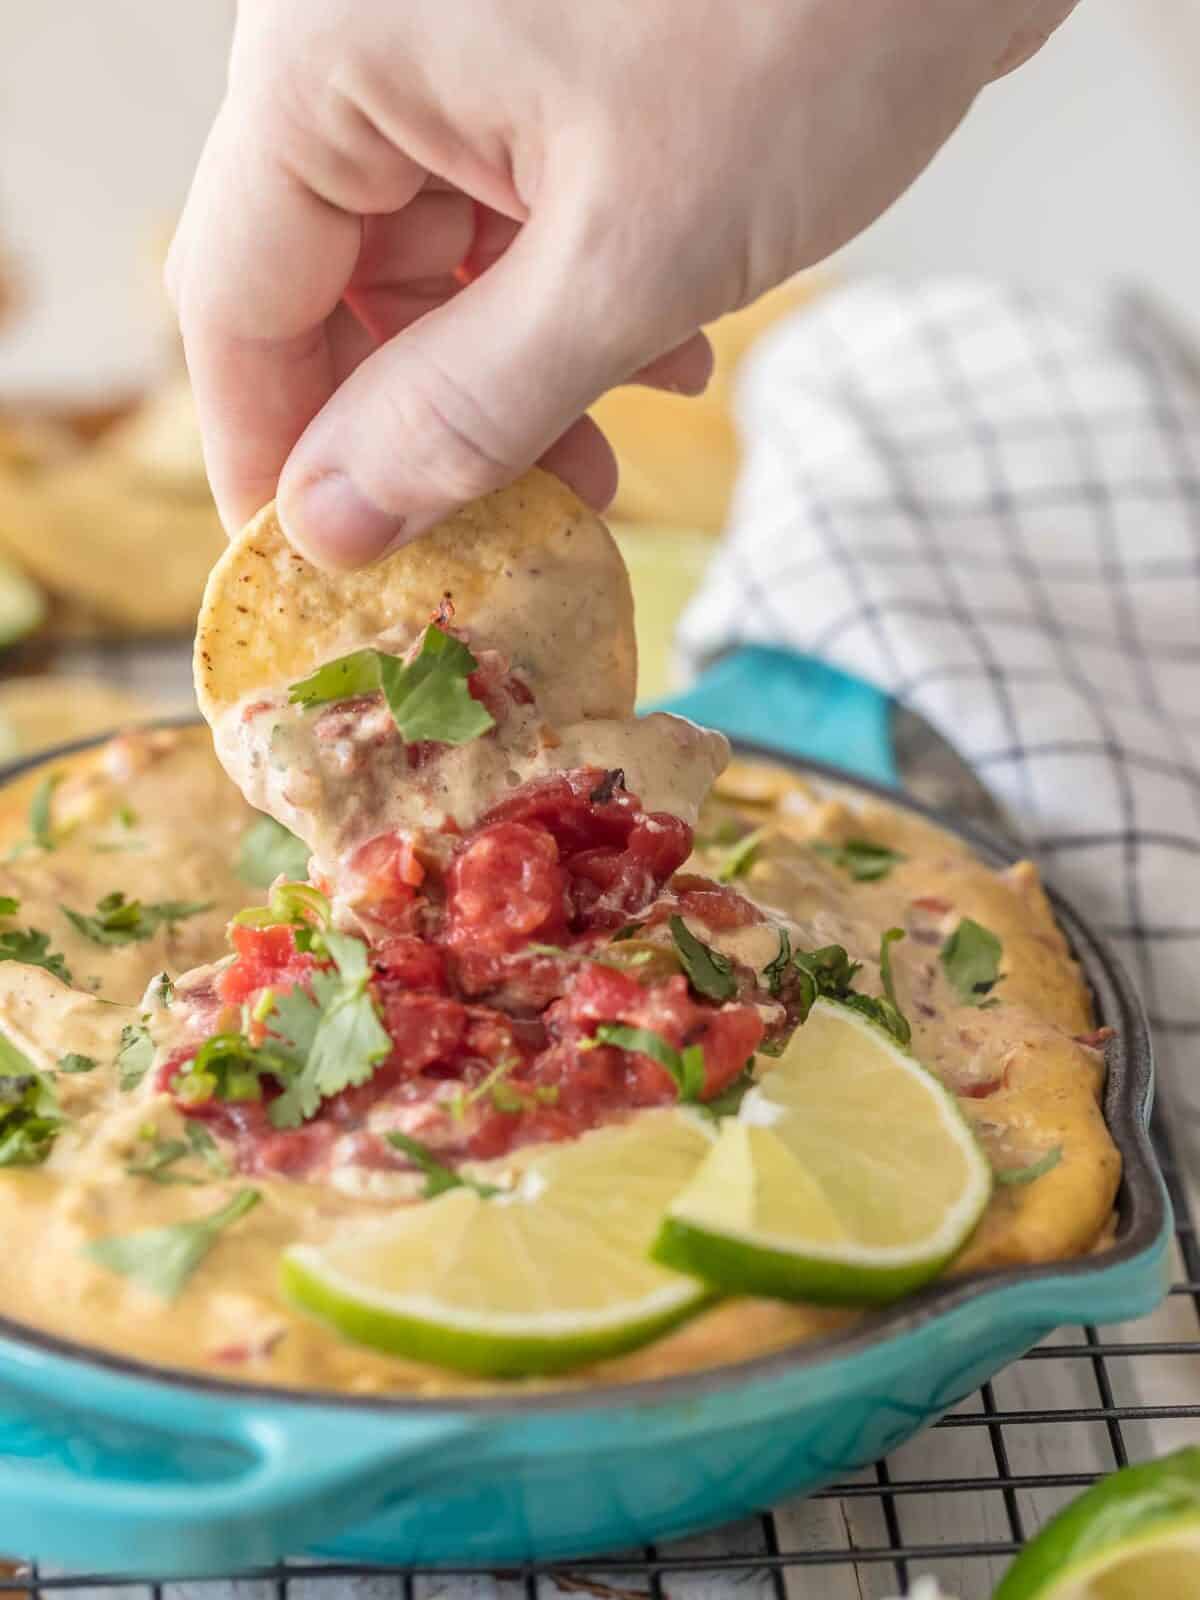 Dipping a chip into a bowl of vegan queso